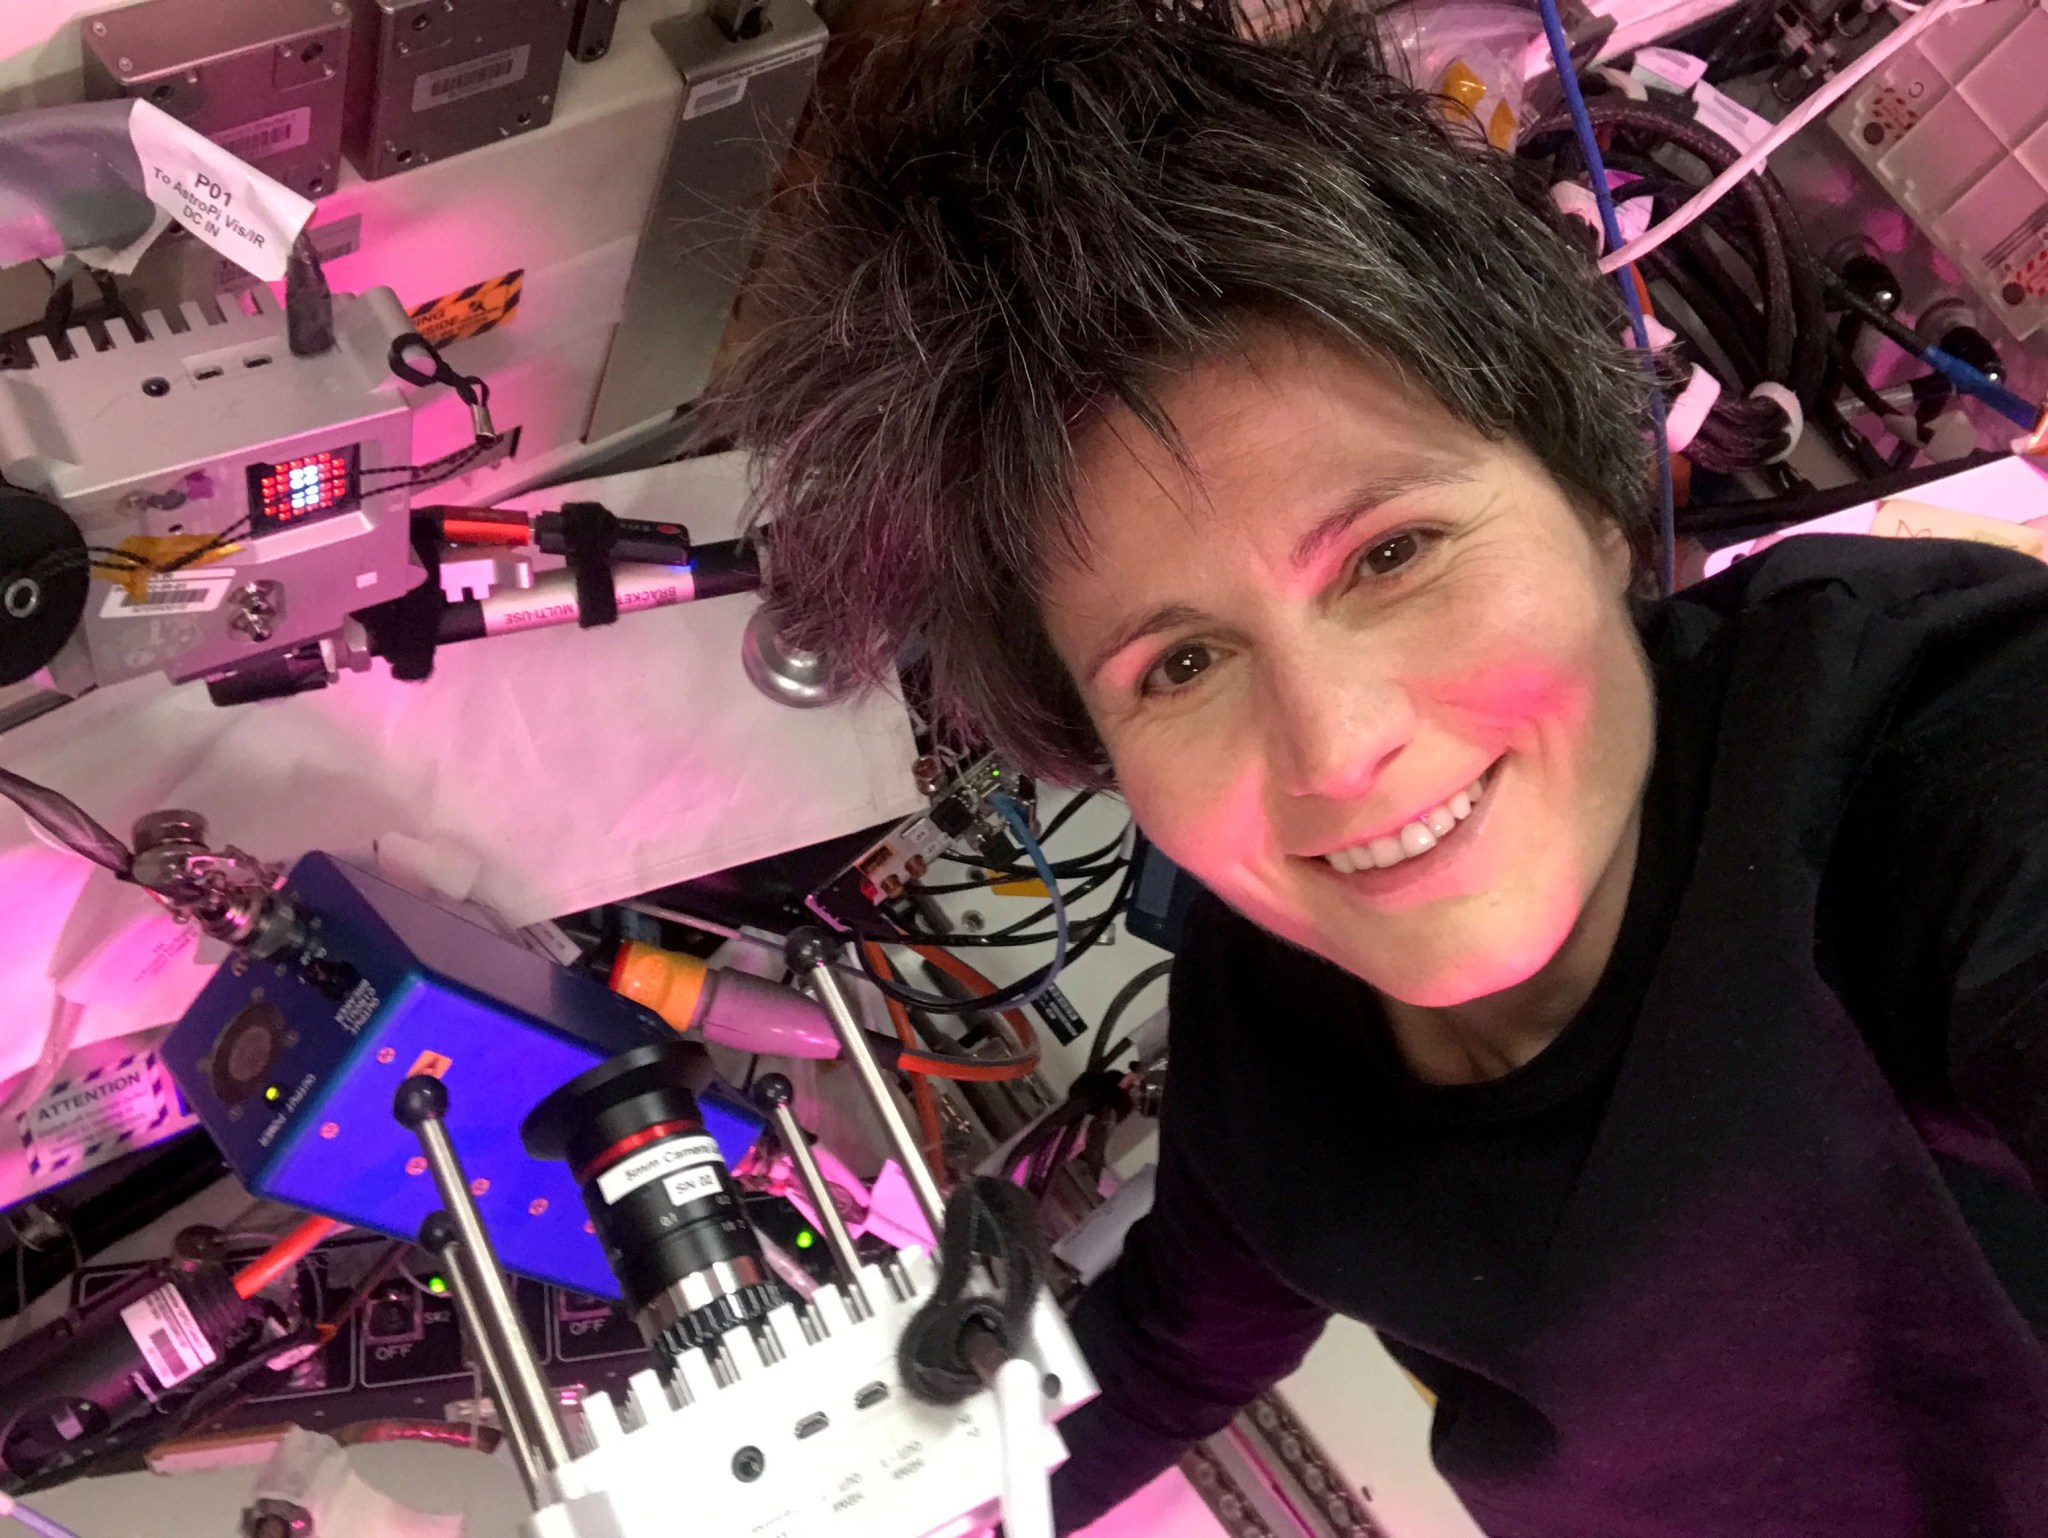 Samantha Cristoforetti, wearing a long-sleeved purple shirt, smiles at the camera. Hardware floating next to her includes a partly visible AstroPi with a black camera attached and a silver AstroPi with red and white lights.